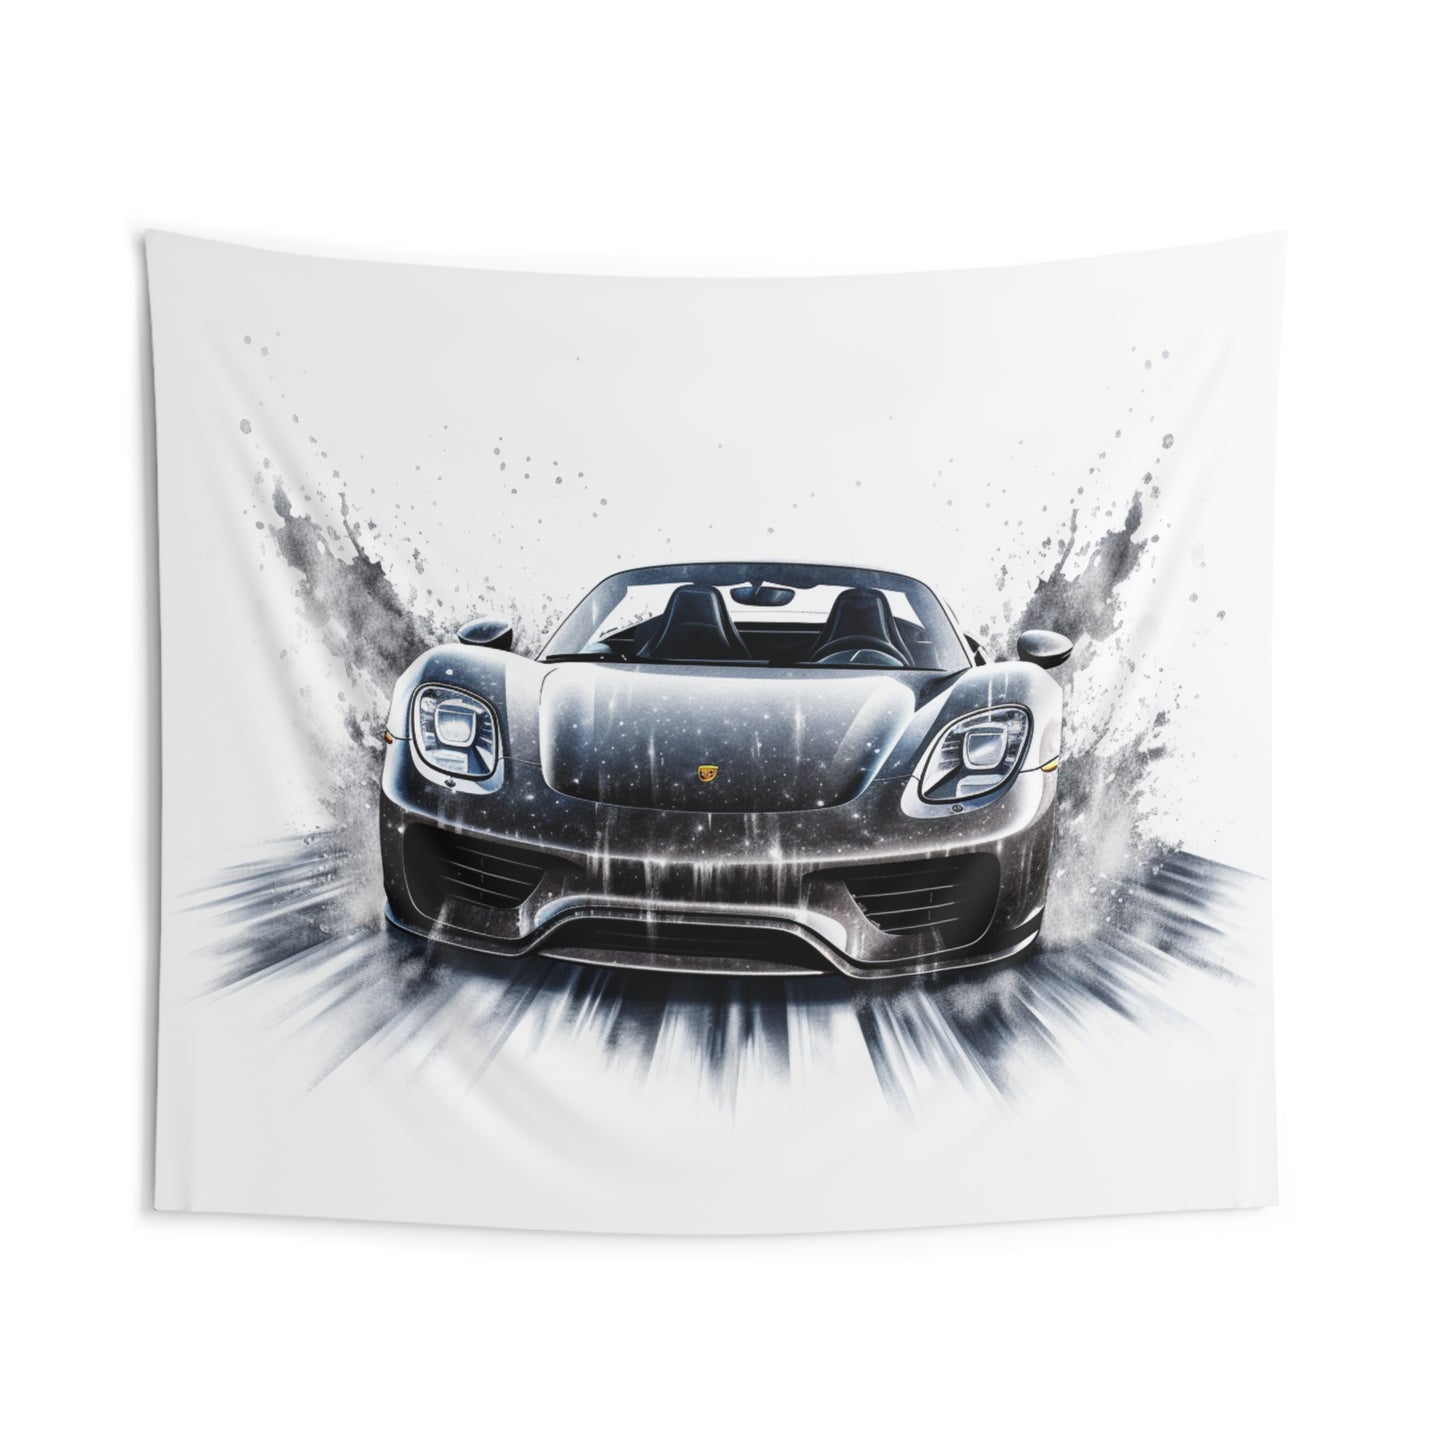 Indoor Wall Tapestries 918 Spyder white background driving fast with water splashing 3